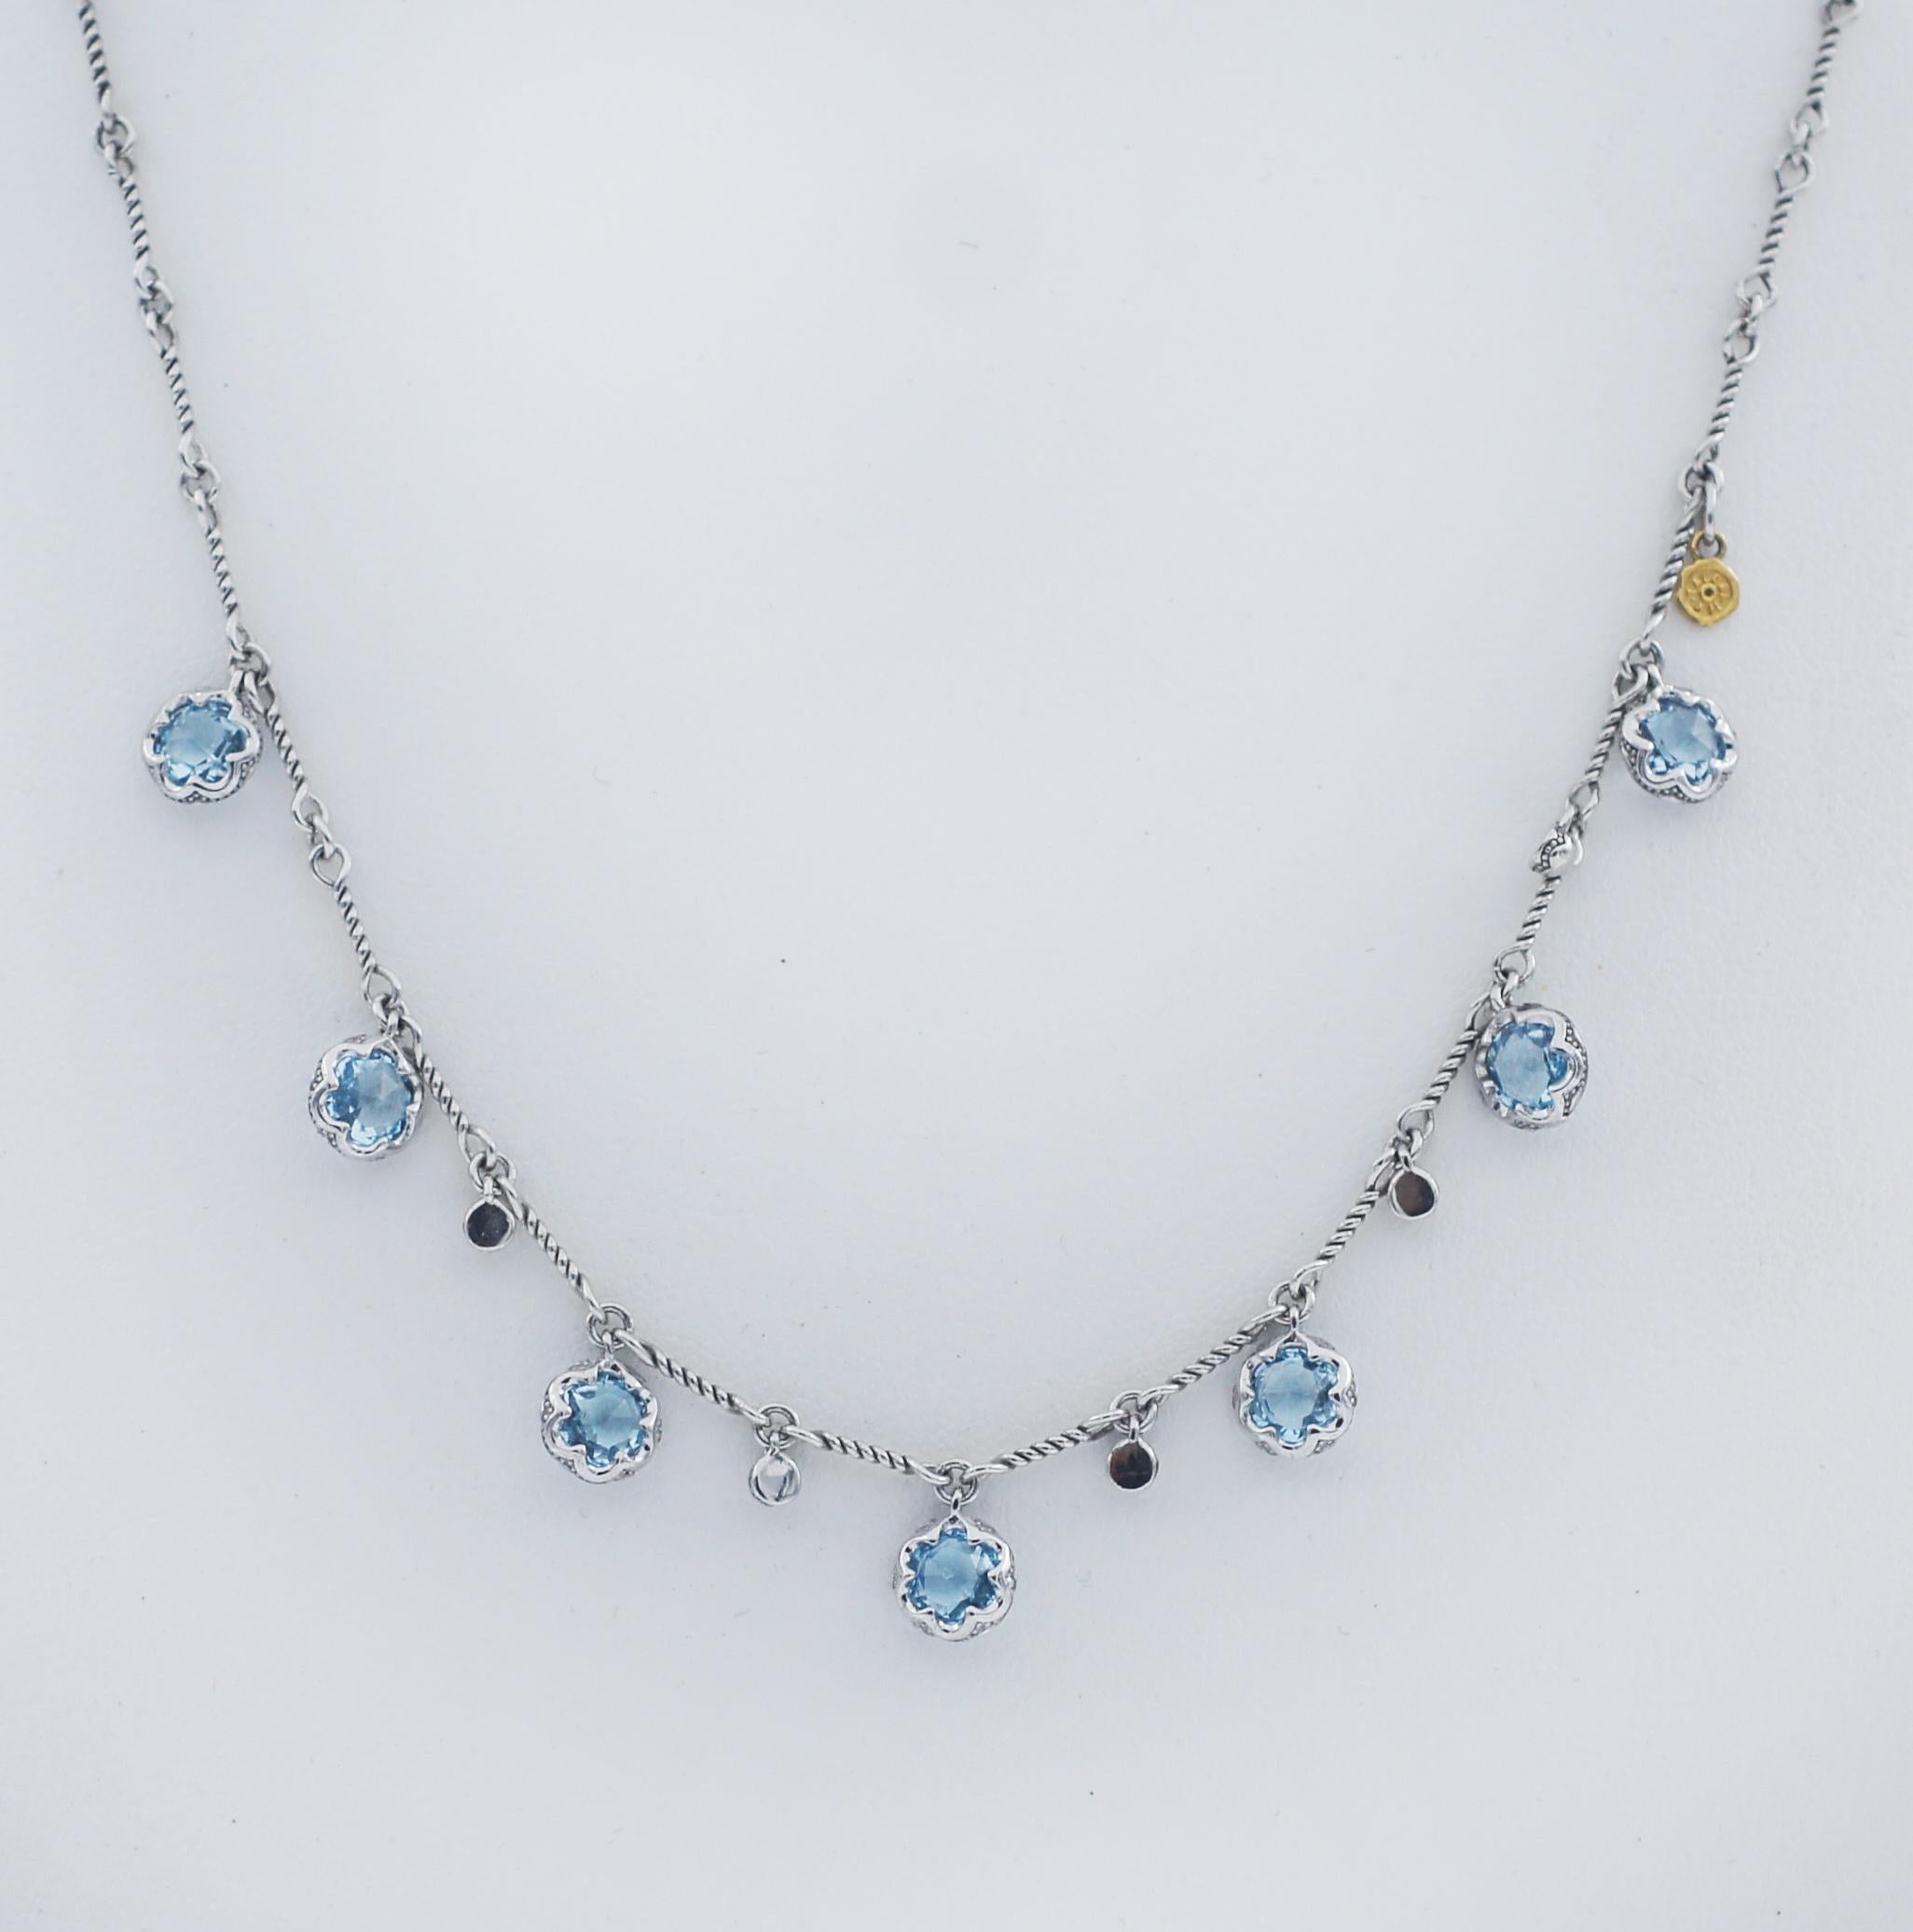 TACORI
925 Silver / 18K
Sonoma Skies
Multi-Gem Drop Necklace featuring Sky Blue Topaz
STYLE SN20502
drops of Sky Blue Topaz gemstones that are encased within crescent outlined silver baskets delicately cascade down your neck. Delicate twists of